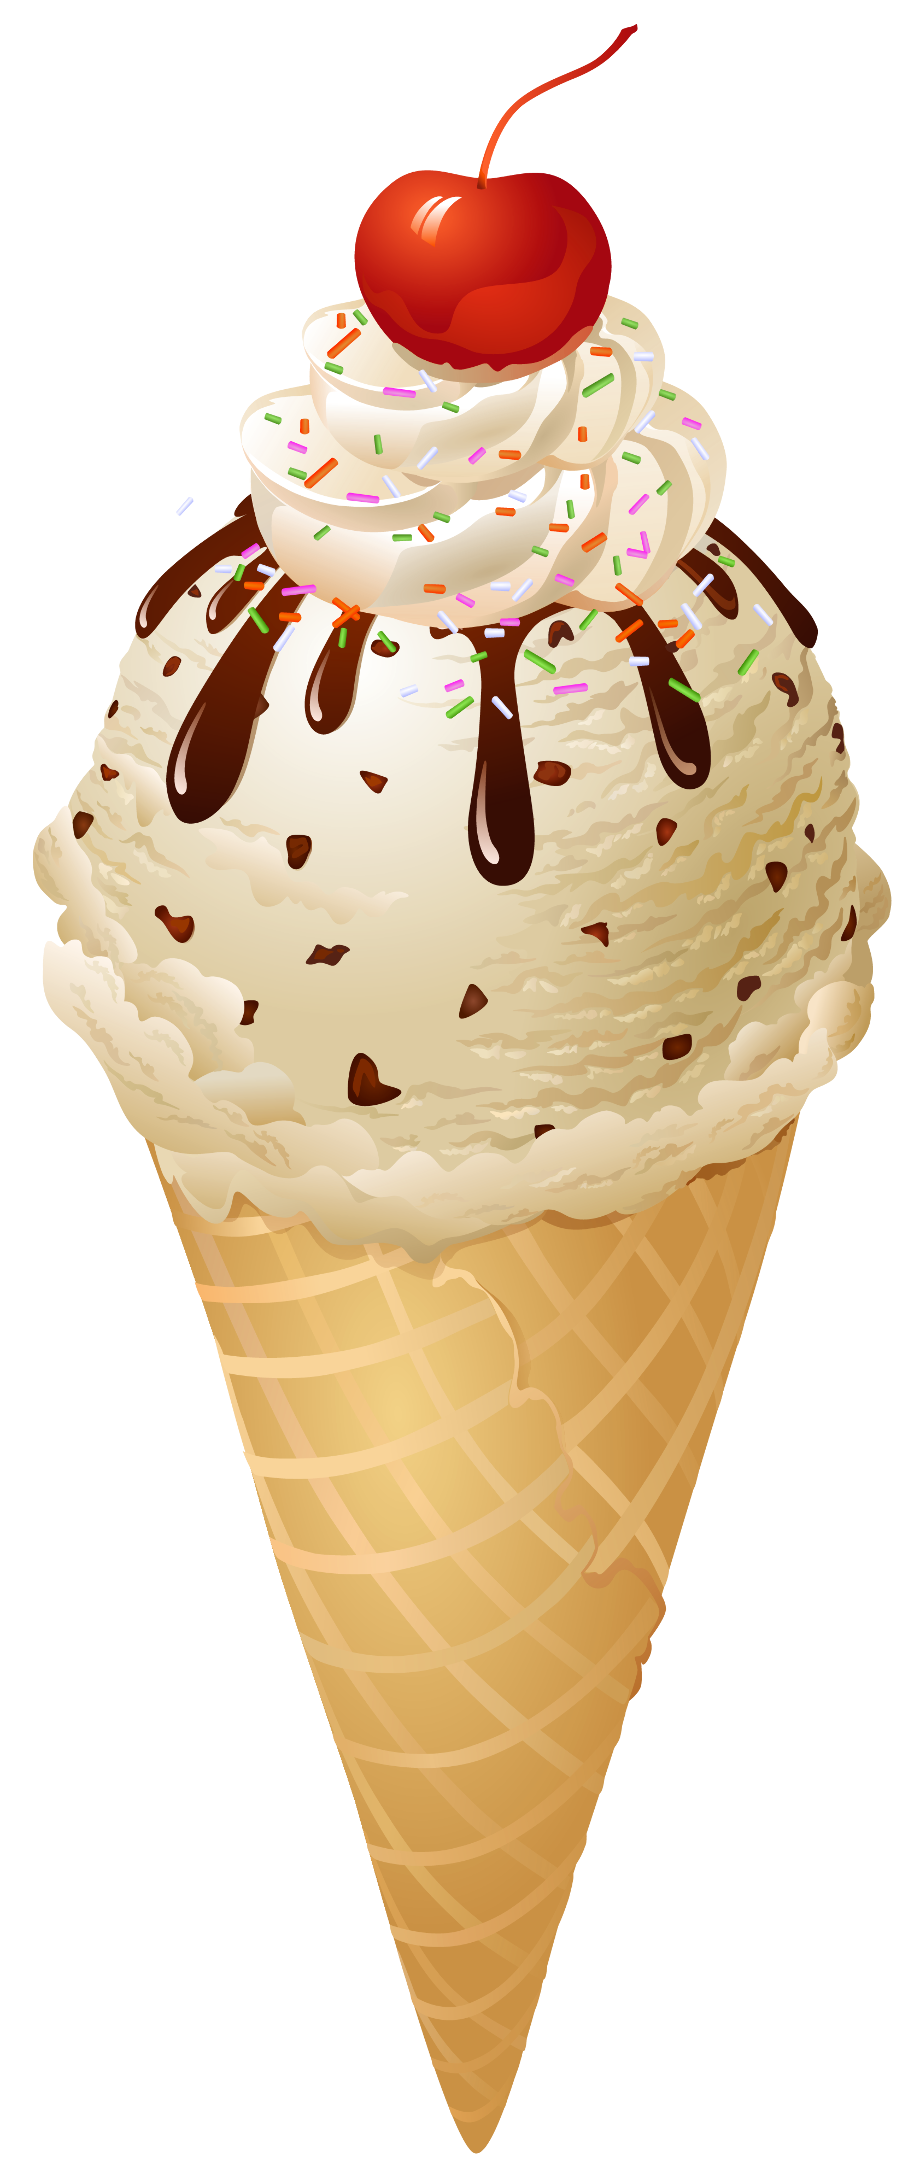 Download Download High Quality ice cream cone clipart transparent ...